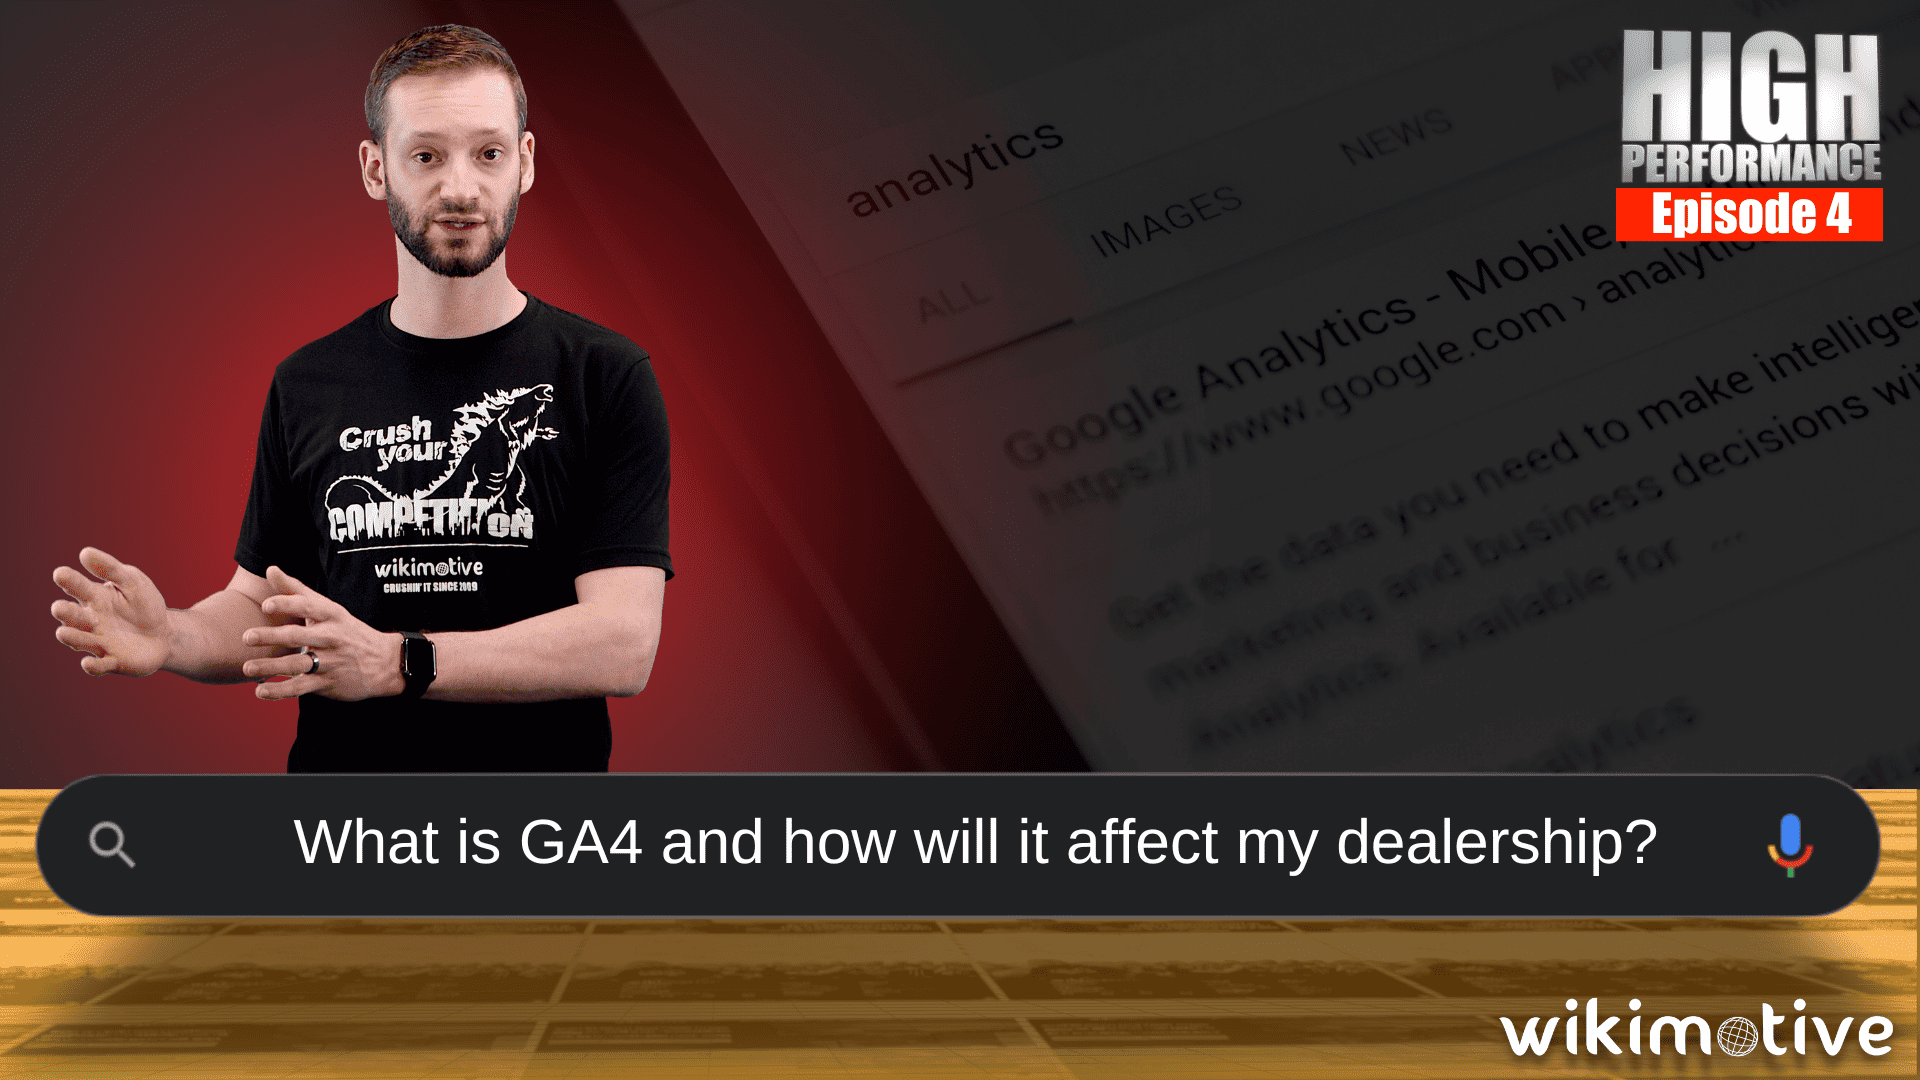 What is GA4 and how will it affect my dealership?